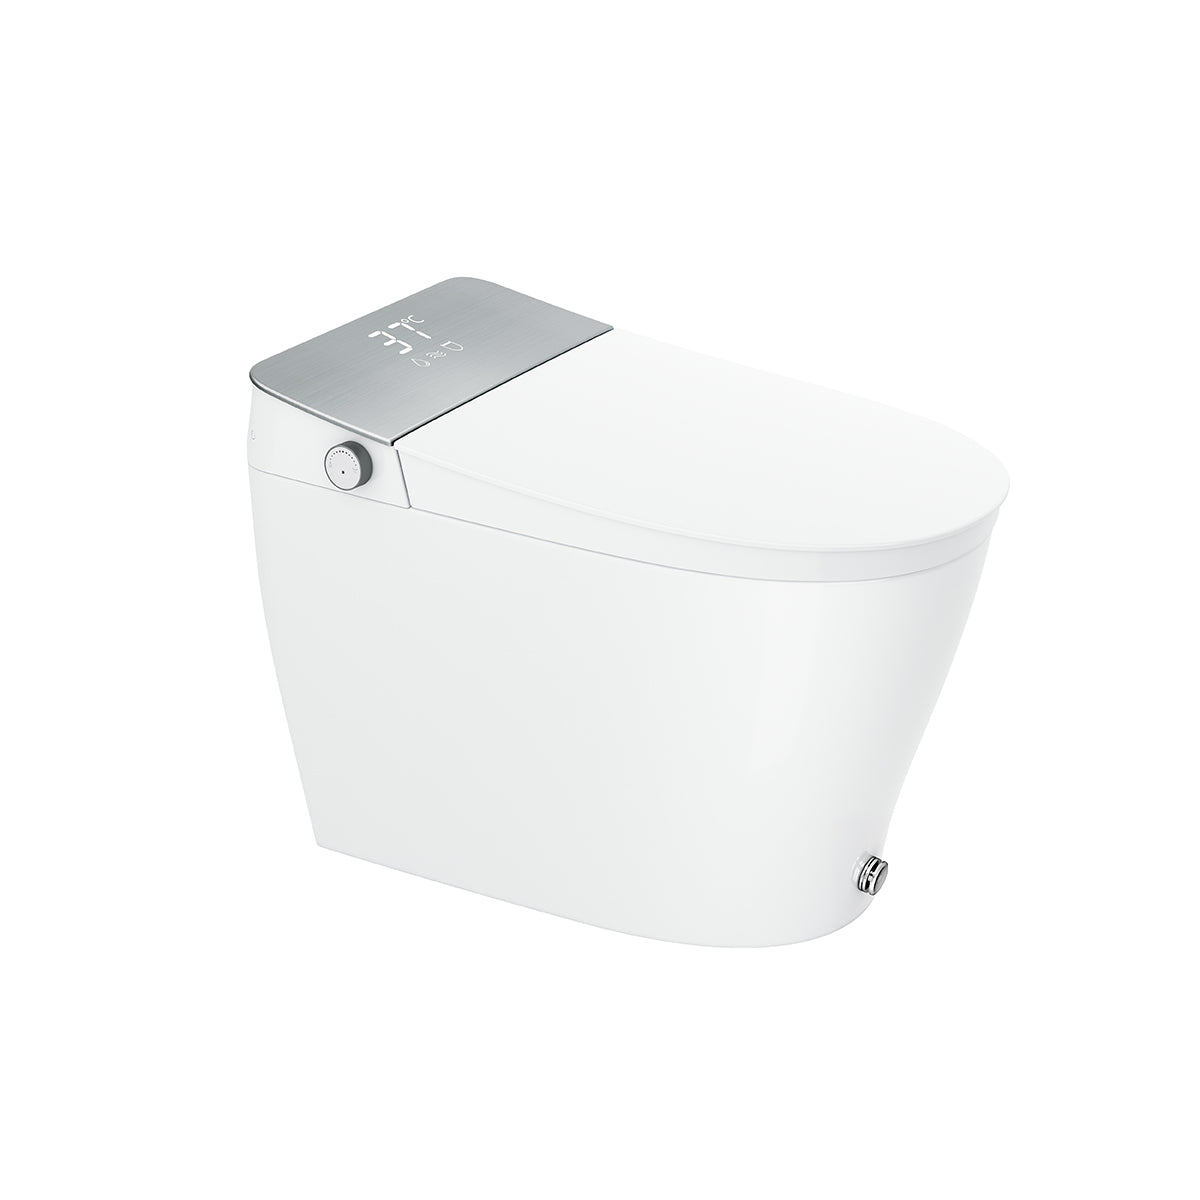 iStyle Smart Bidet Toilet, Elongated One piece Toilet with Foot Kick Open/Close Lid Auto, Dual Flush, Heated Seat, UV Sterilizer , Air Dryer, Auto Deodorization, Blackout Flush, Multi Wash Modes, Led Night Light Guide, 12" Rough (Model-1 Series 7000 US1A)